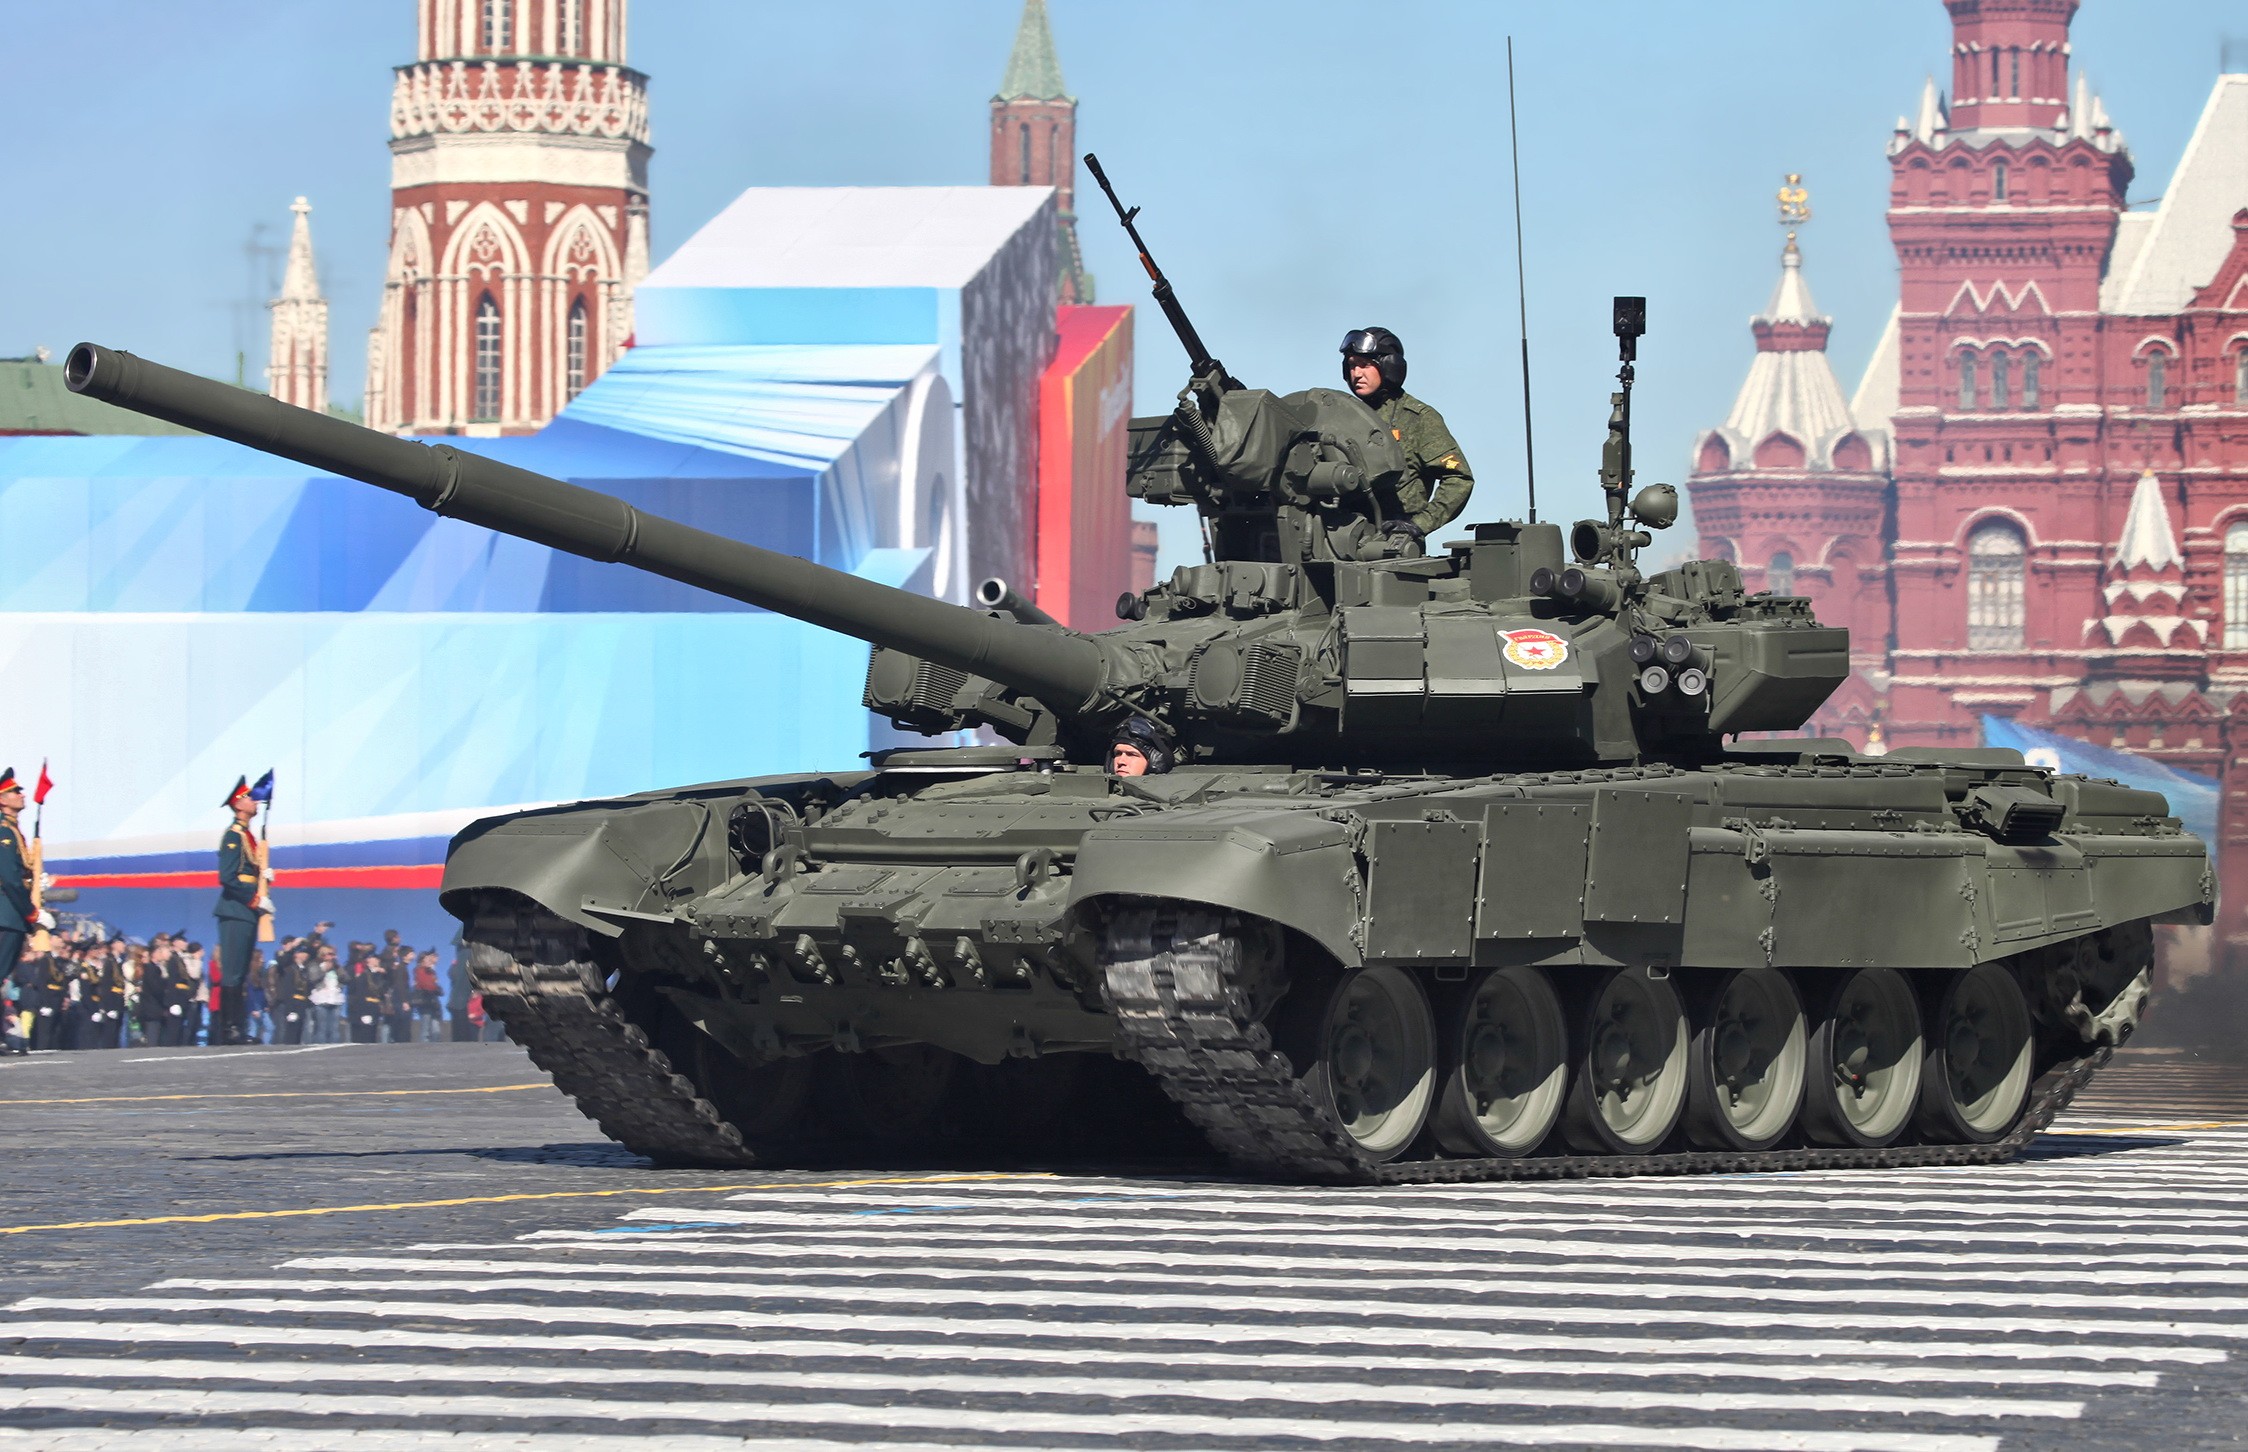 T 90, Tank, Russian Army, Red Square, Moscow, Russia, Military Wallpaper